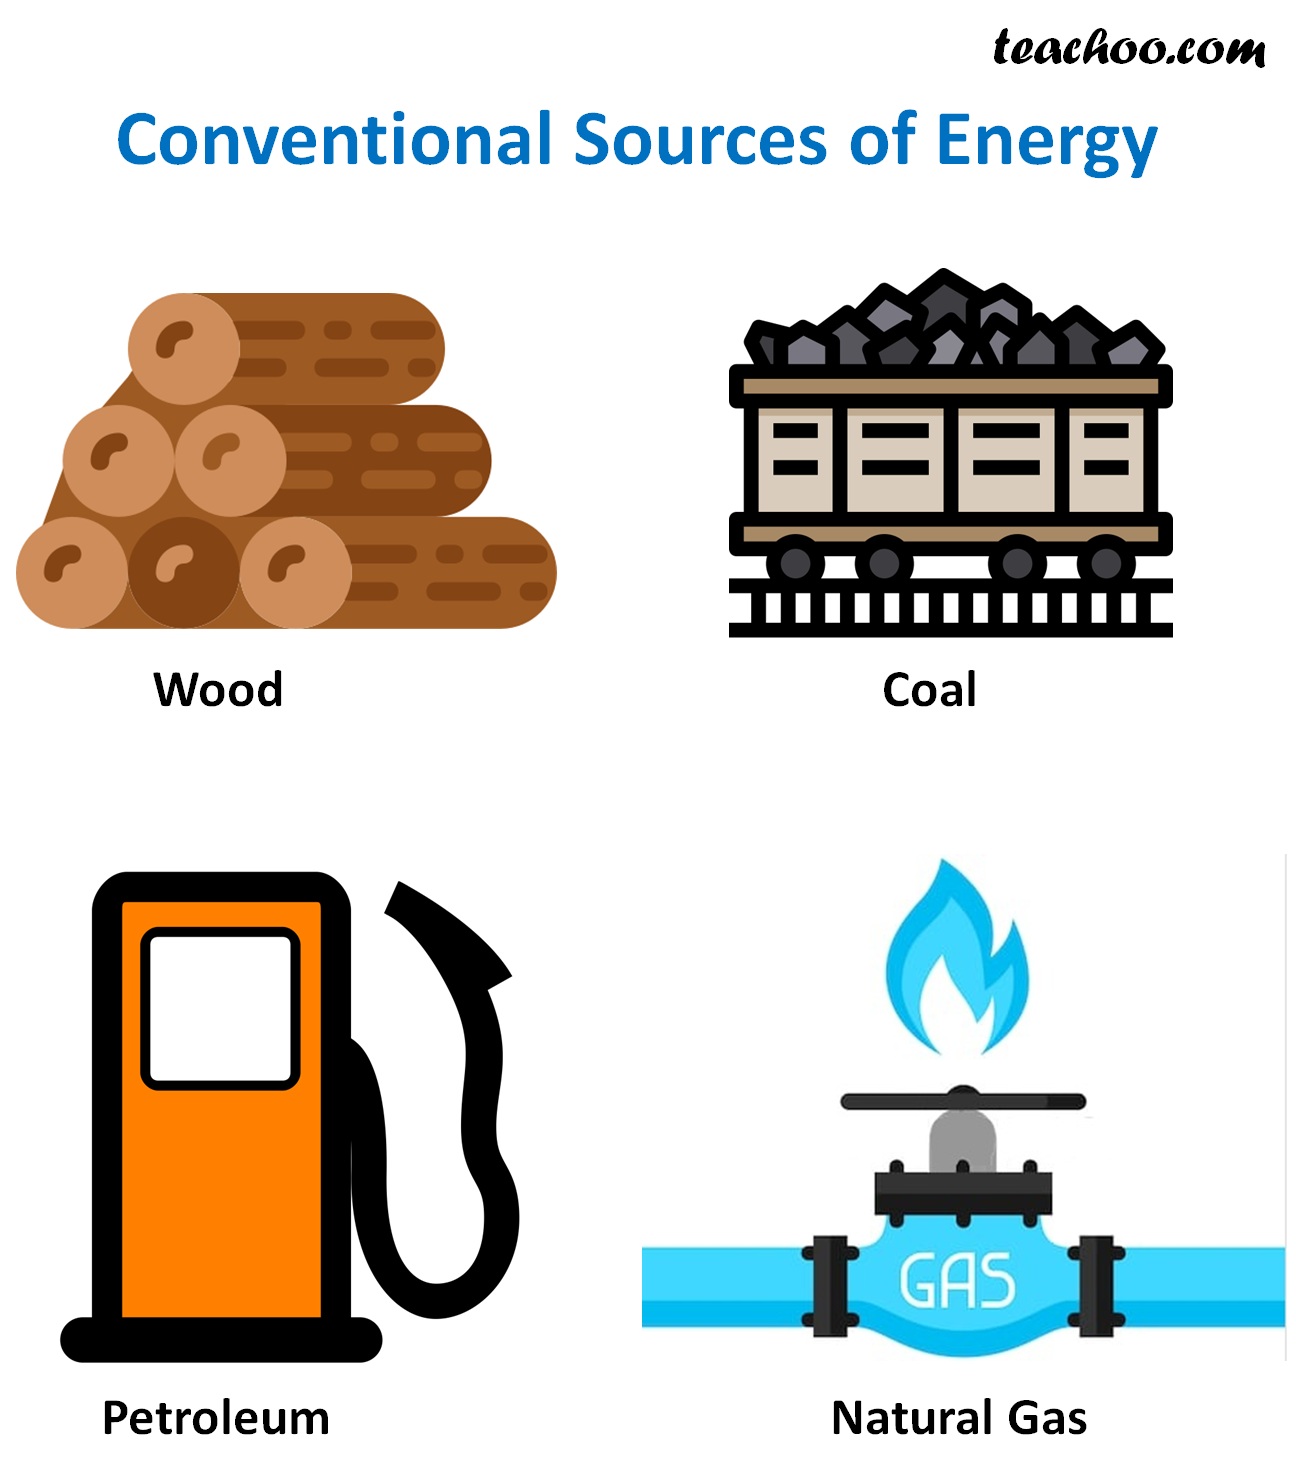 Conventional Sources of Energy - Definition, Types, Examples - Teachoo